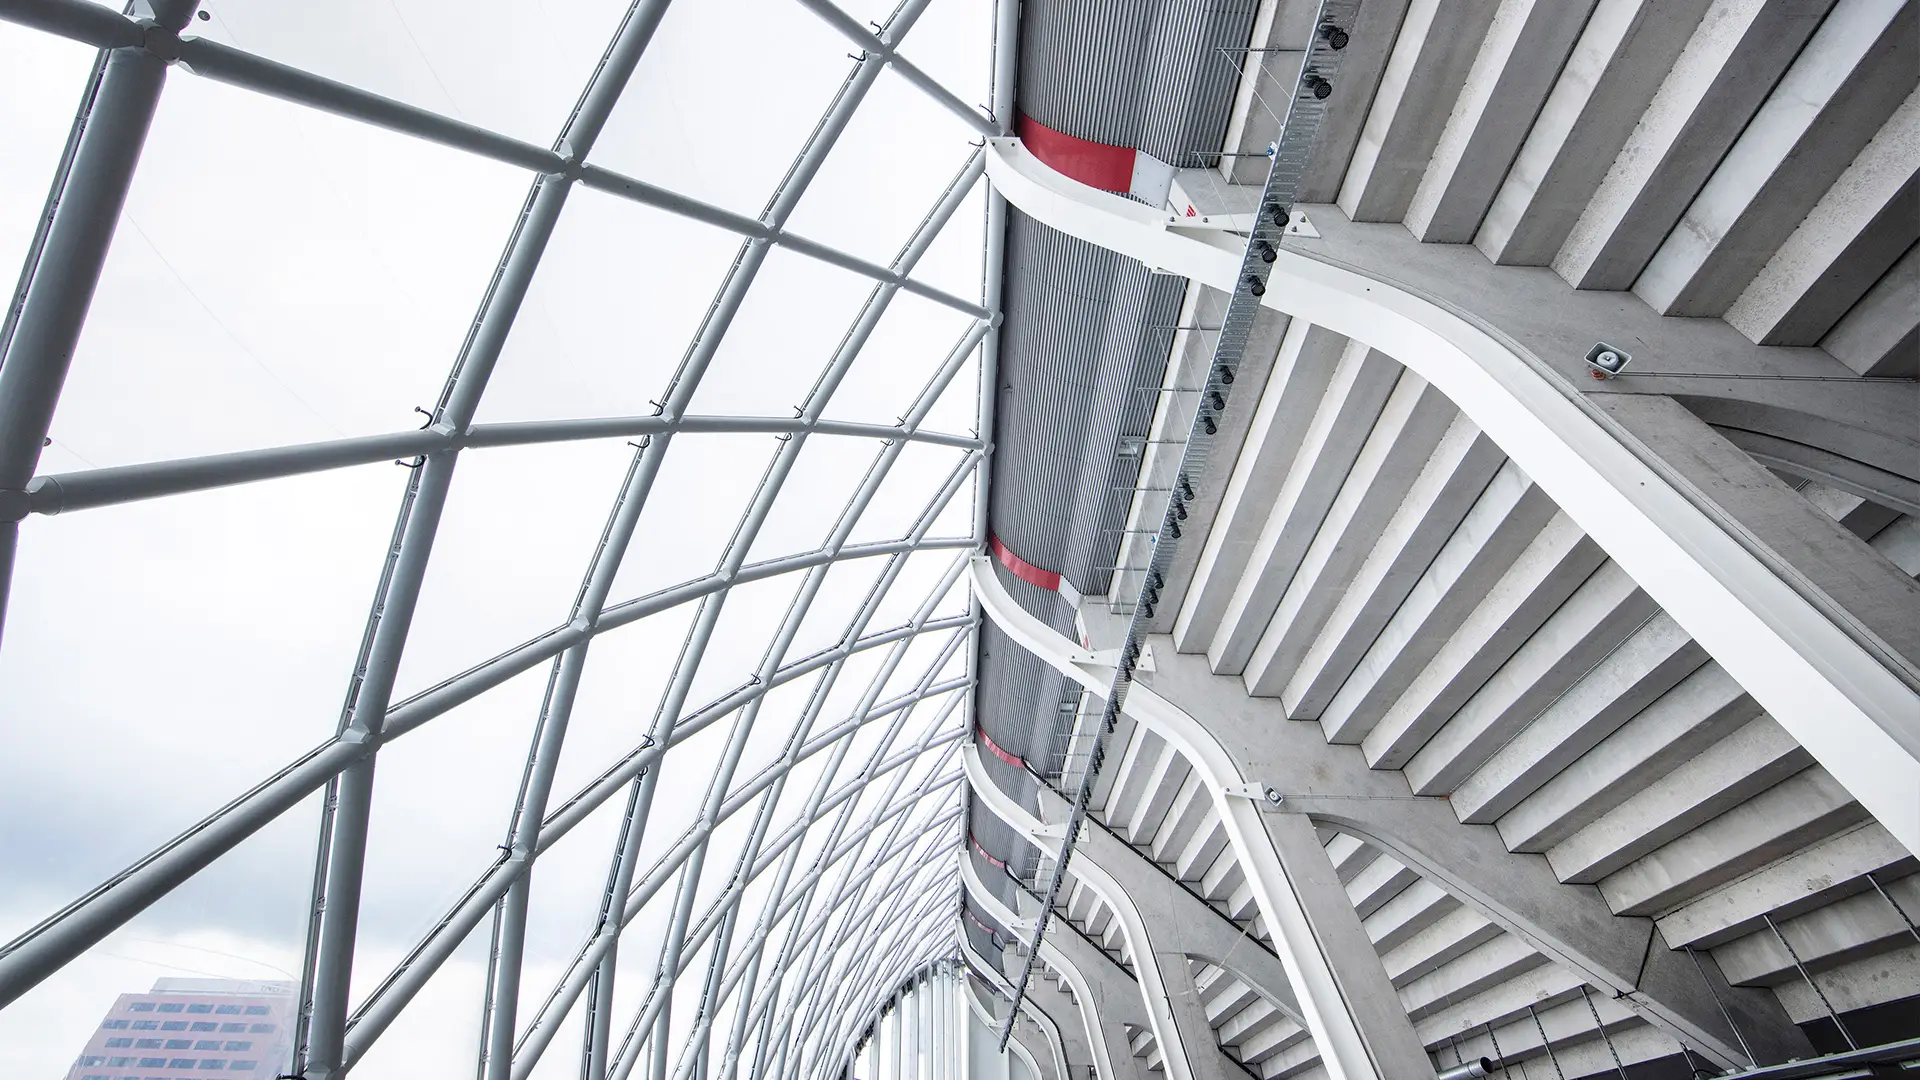 Johan Cruijff Arena has a 2,500 m² Texlon® ETFE facade by Vector Foiltec, which enlarged the lower and upper tier concourses.